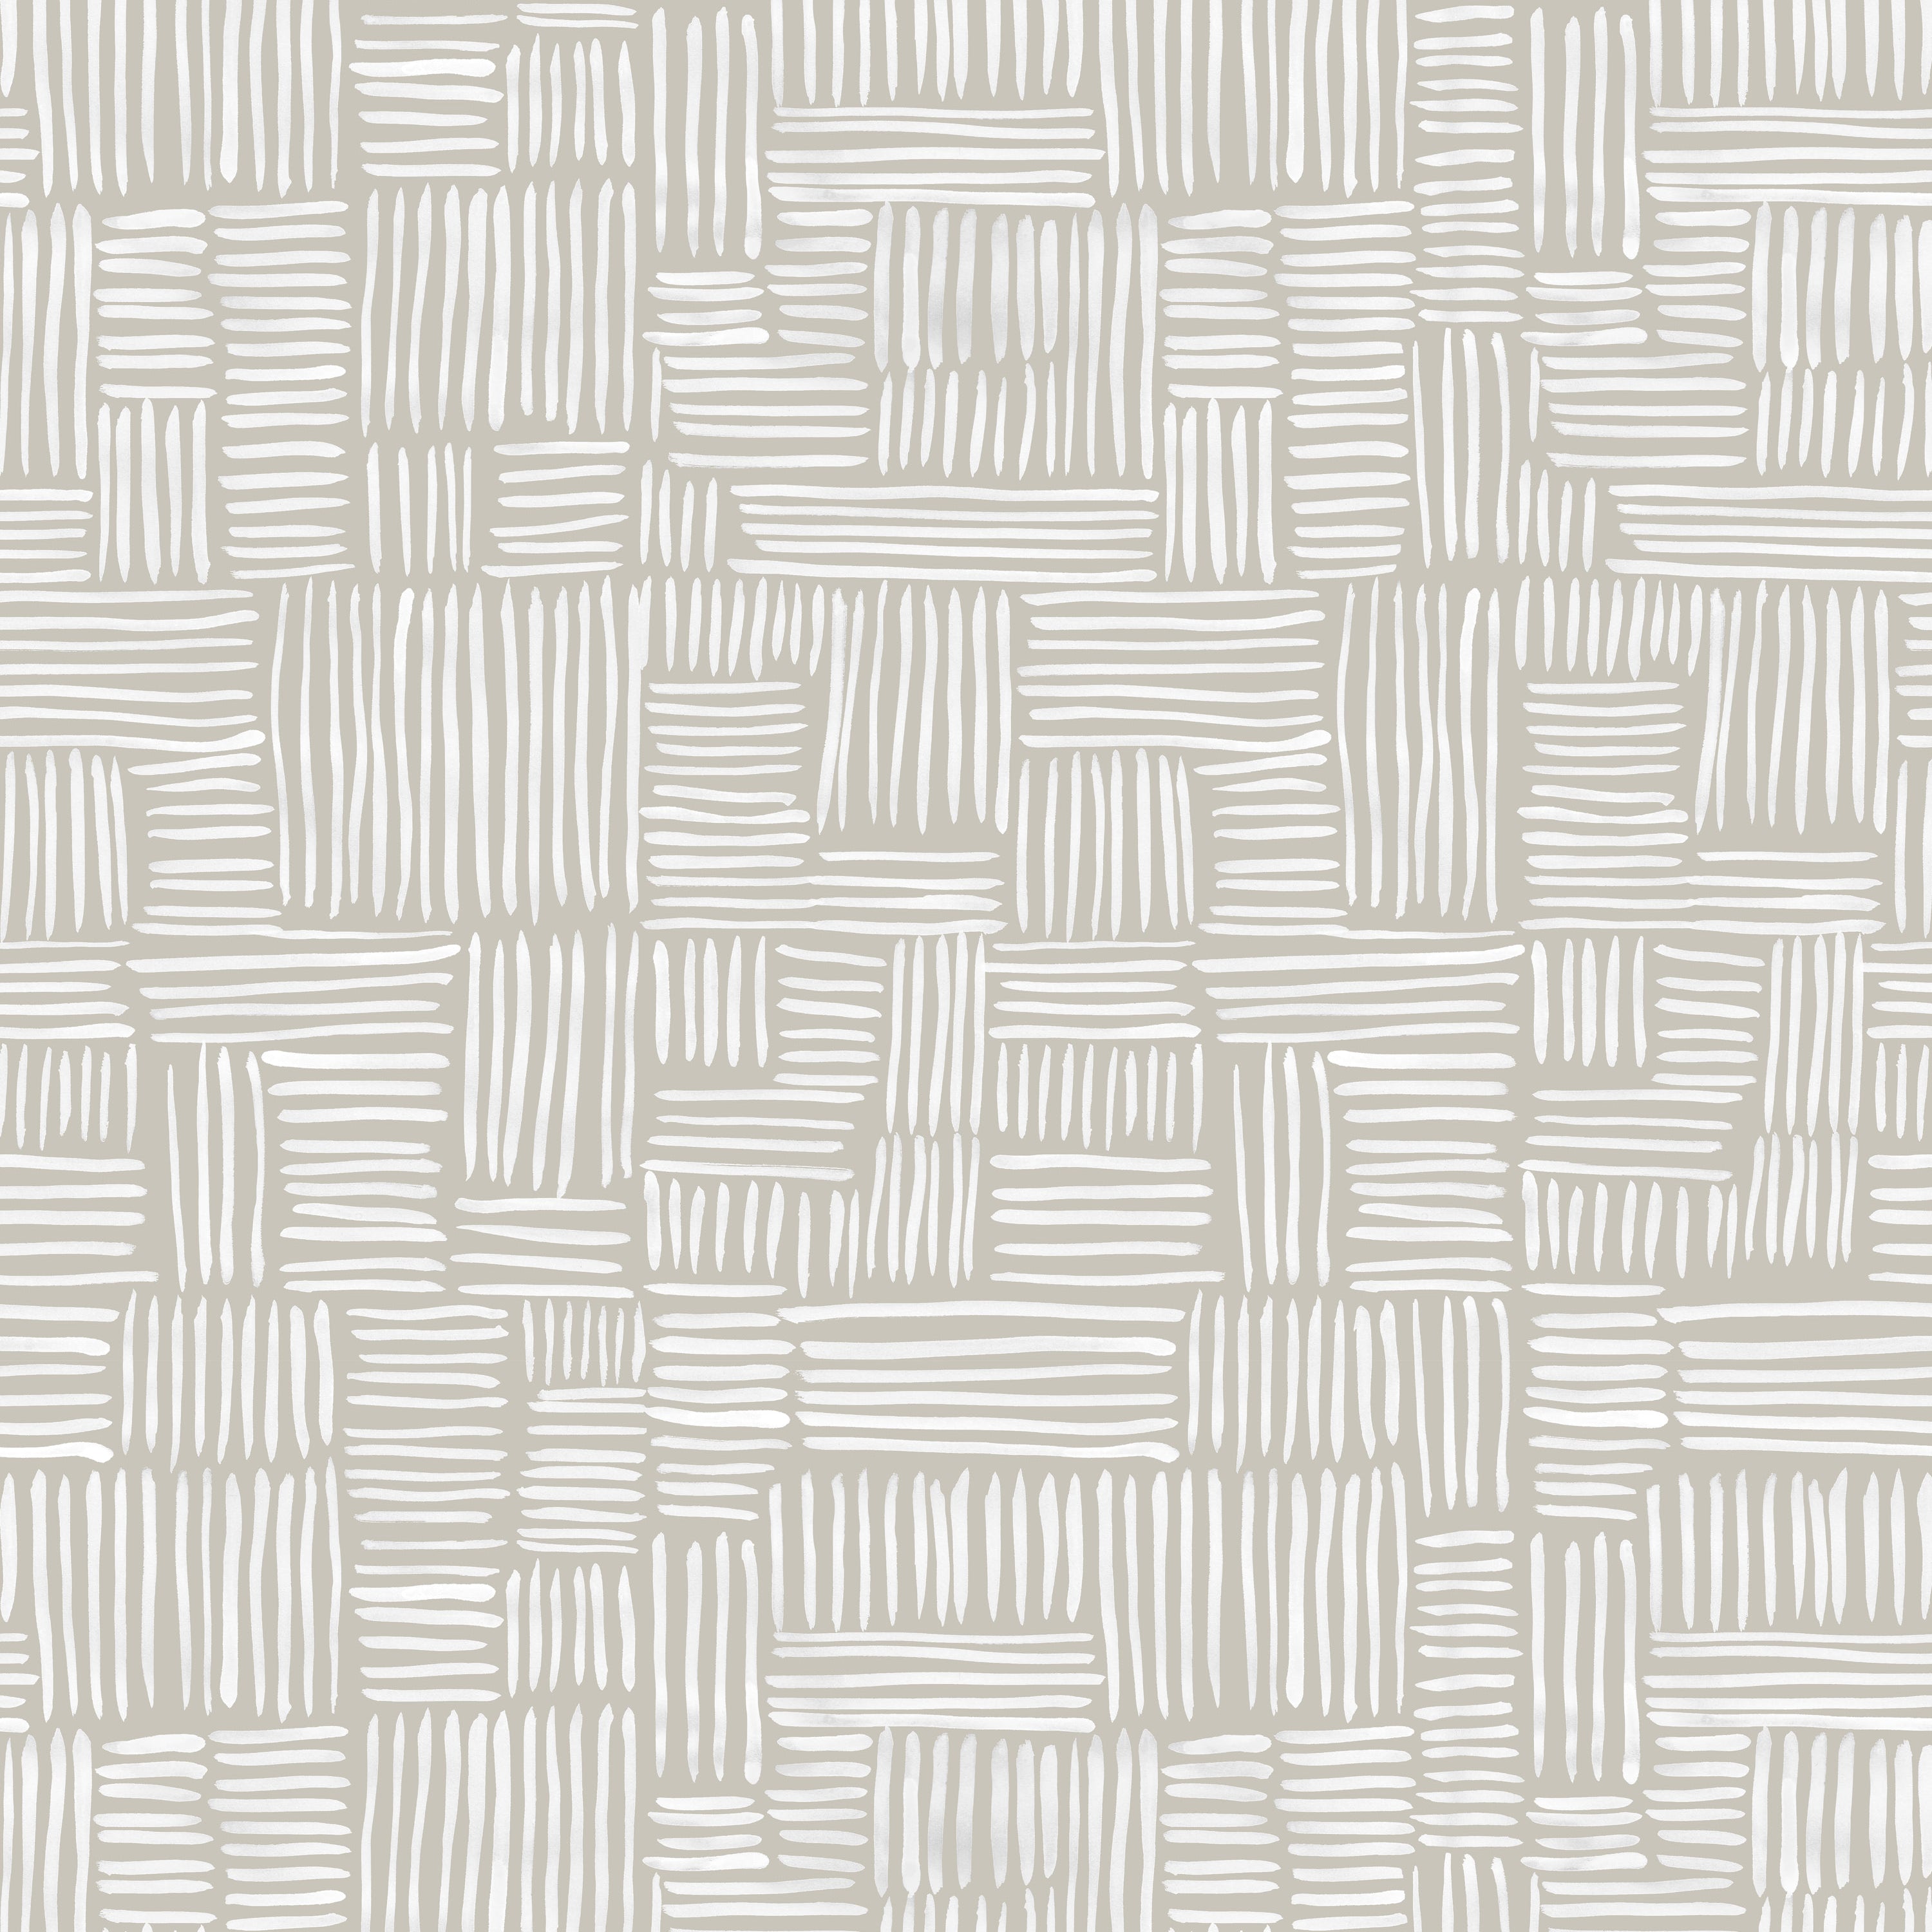 Detail of wallpaper in a directional dash pattern in white on a cream field.